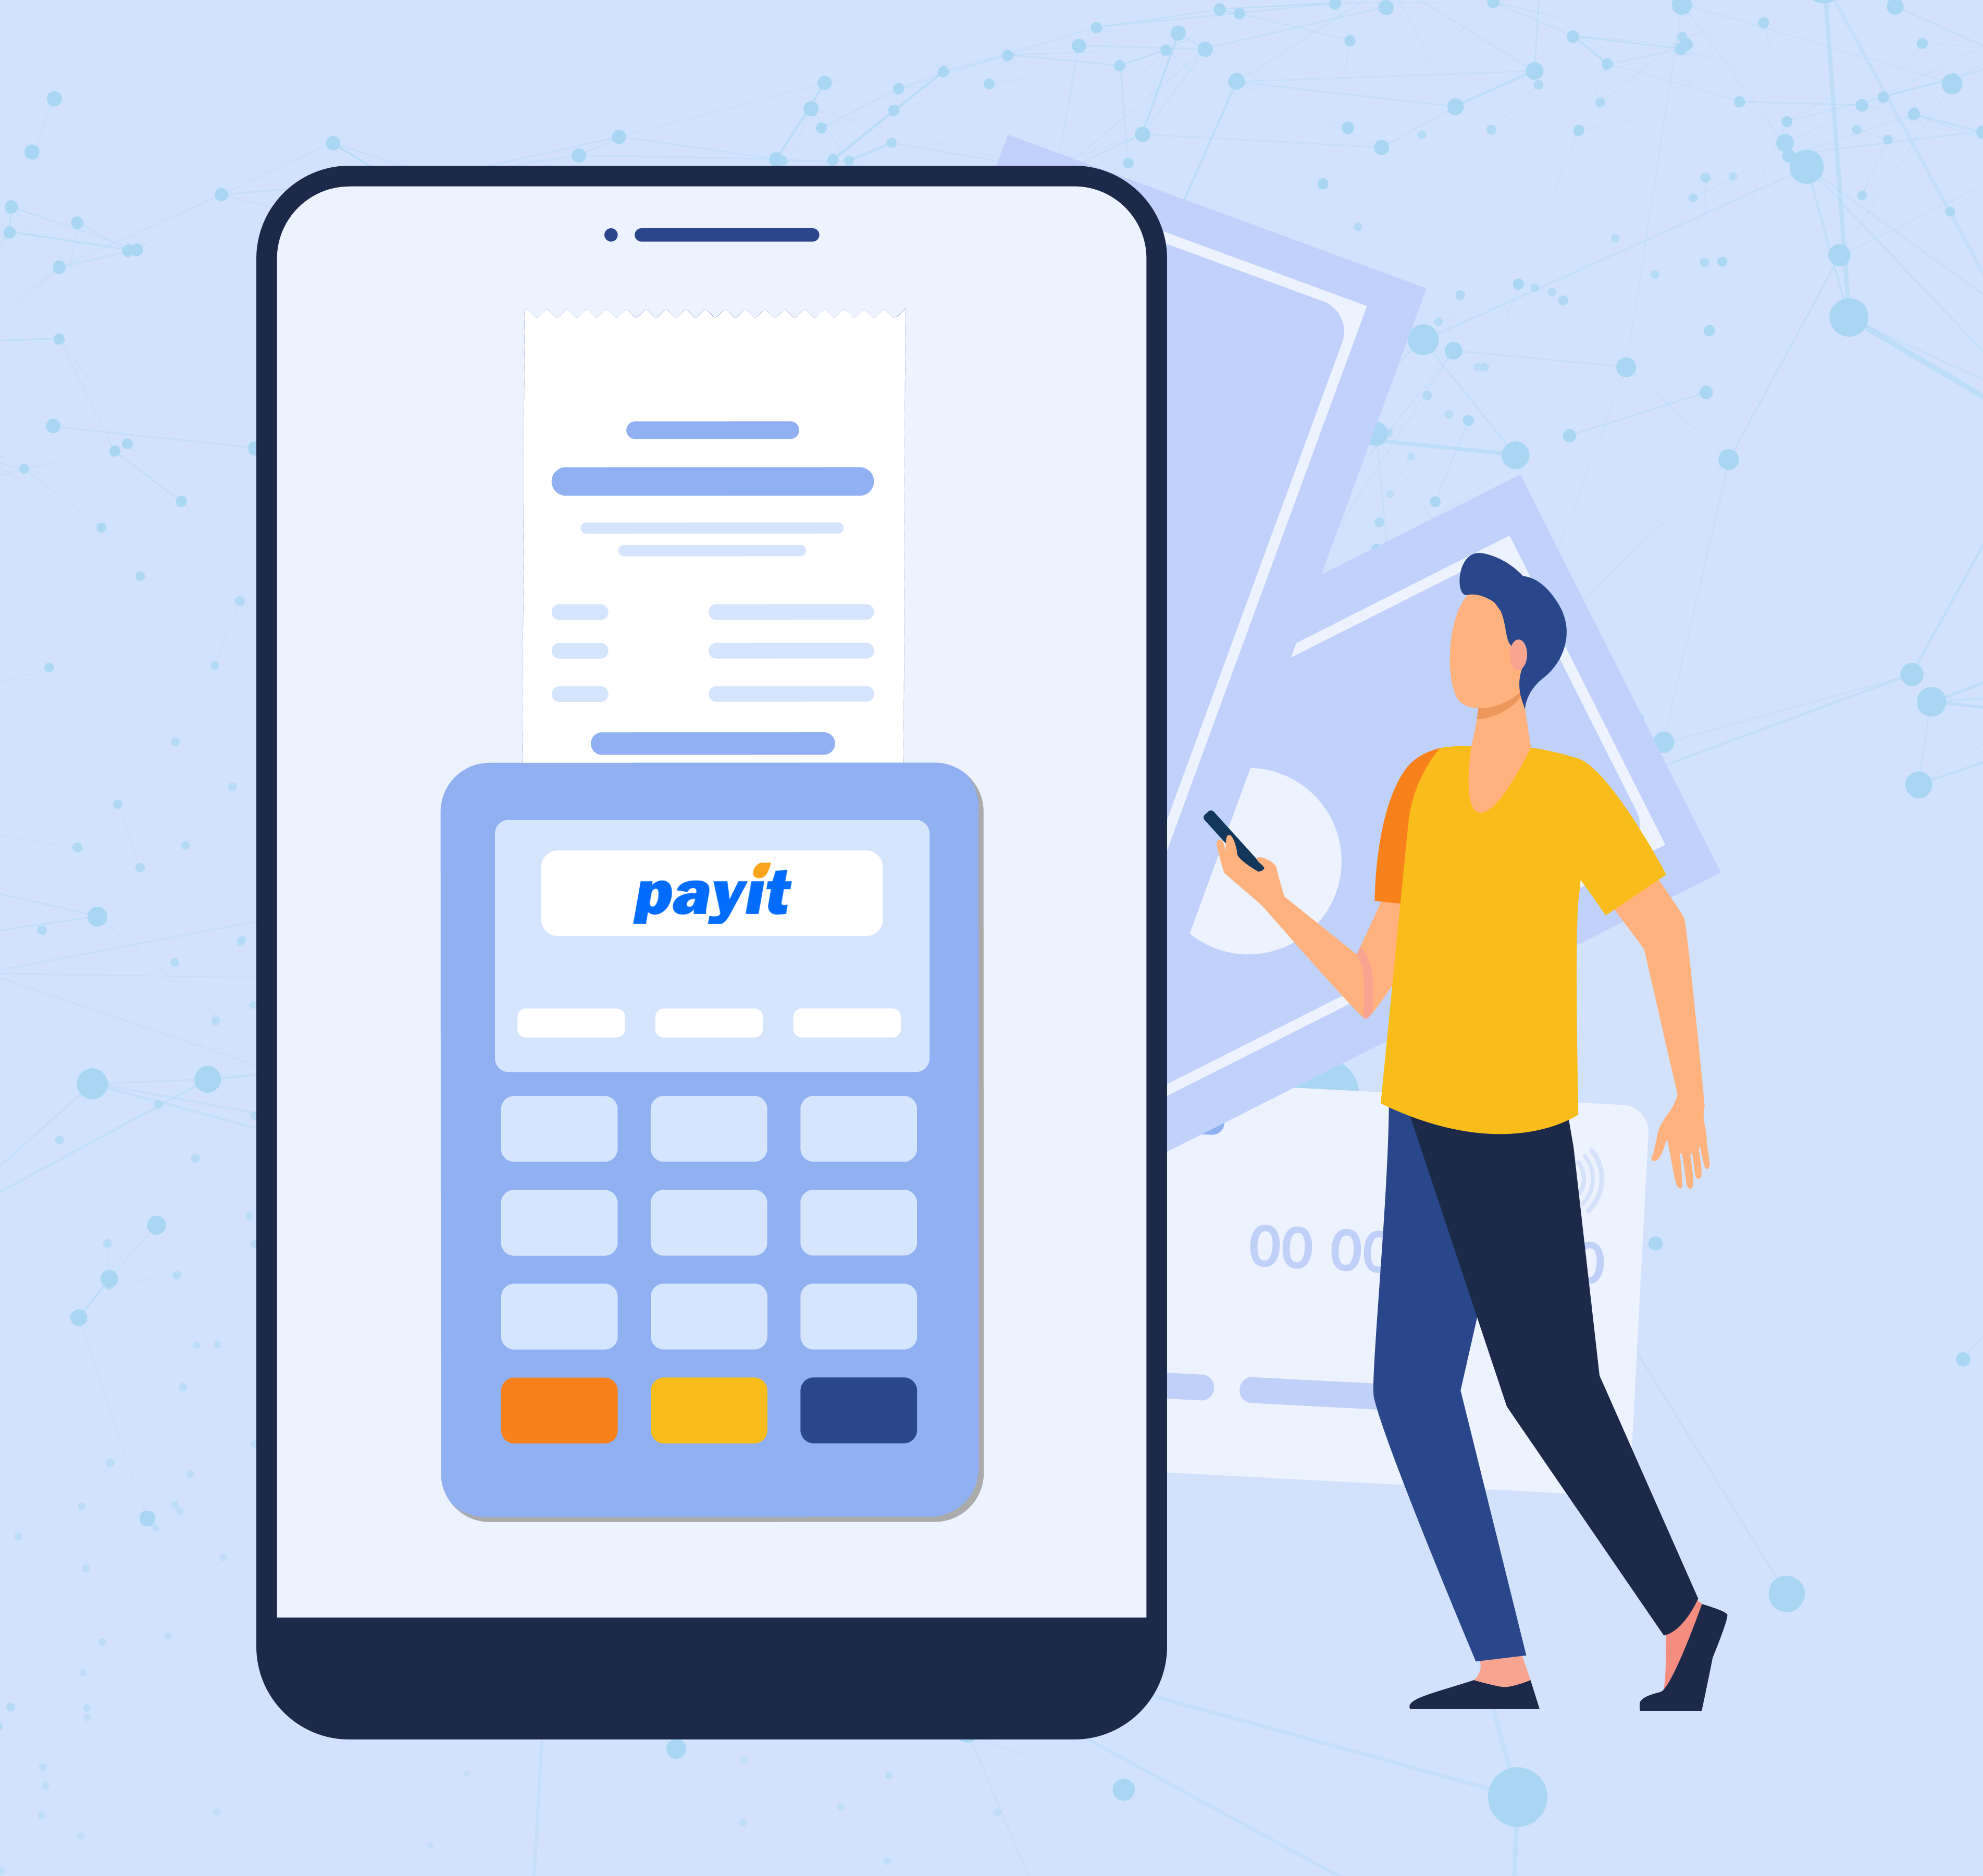 PayIt resident billing services help local governments streamline municipal utility payments and online revenue collection